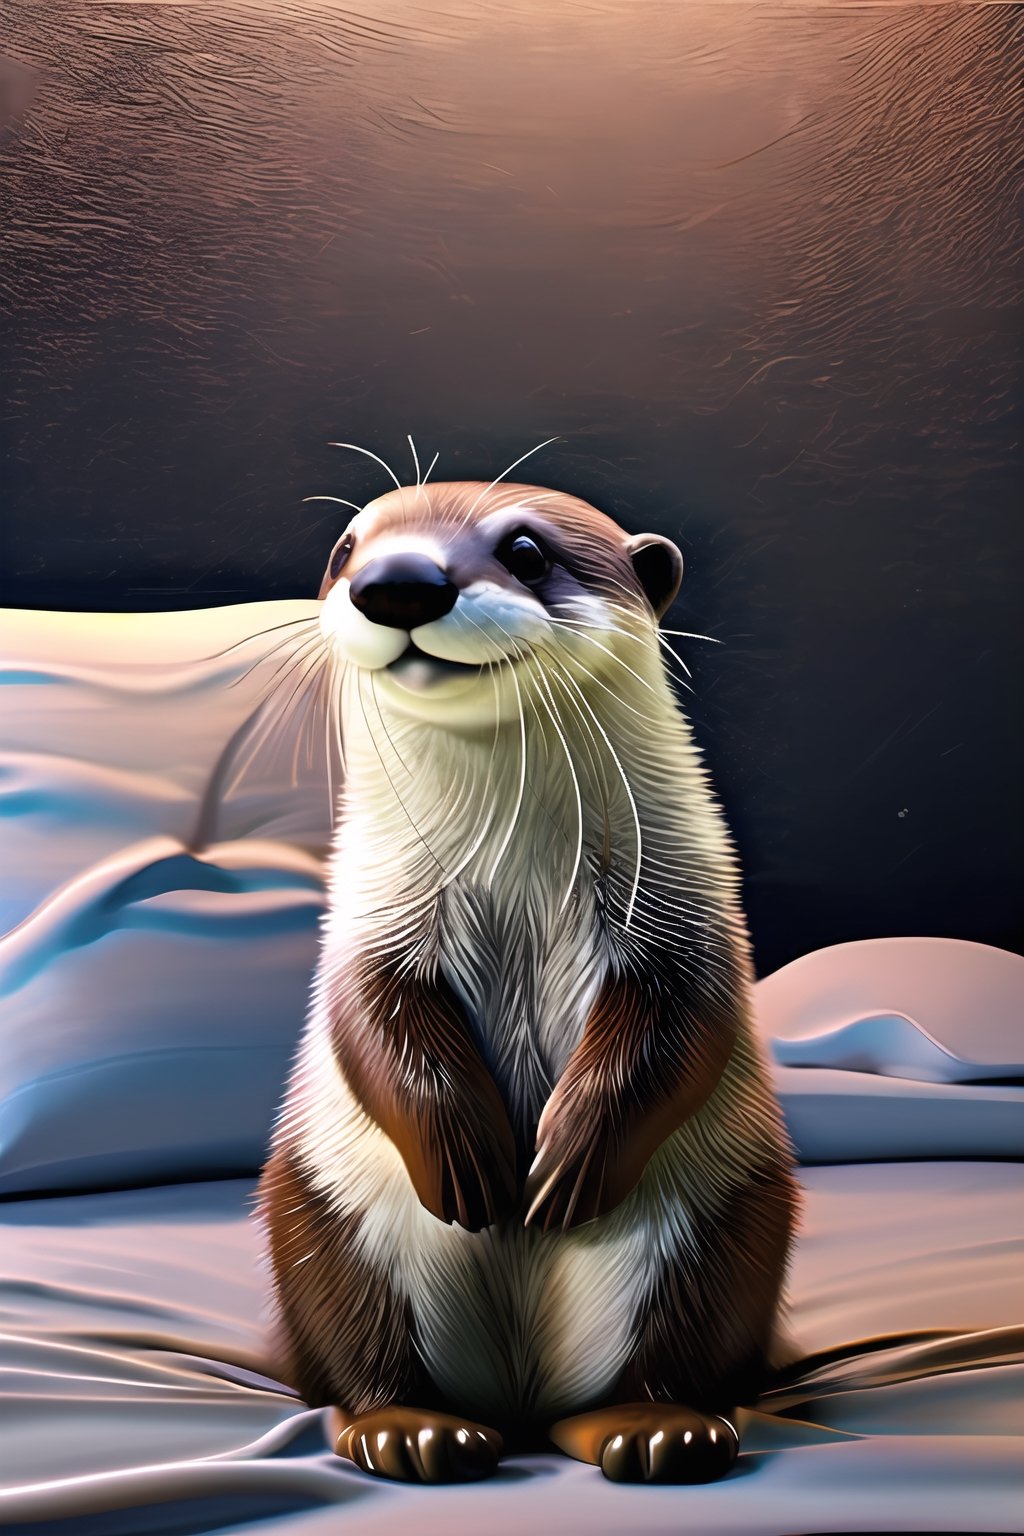 Realistic, a mini cute little otter, lying on the bed, The background is a cozy room contrasting with the color of the black otter. The posture and expression of the otter express a "happy" feeling, delicate and cute,bsp,hybrid,Extremely Realistic,Animal